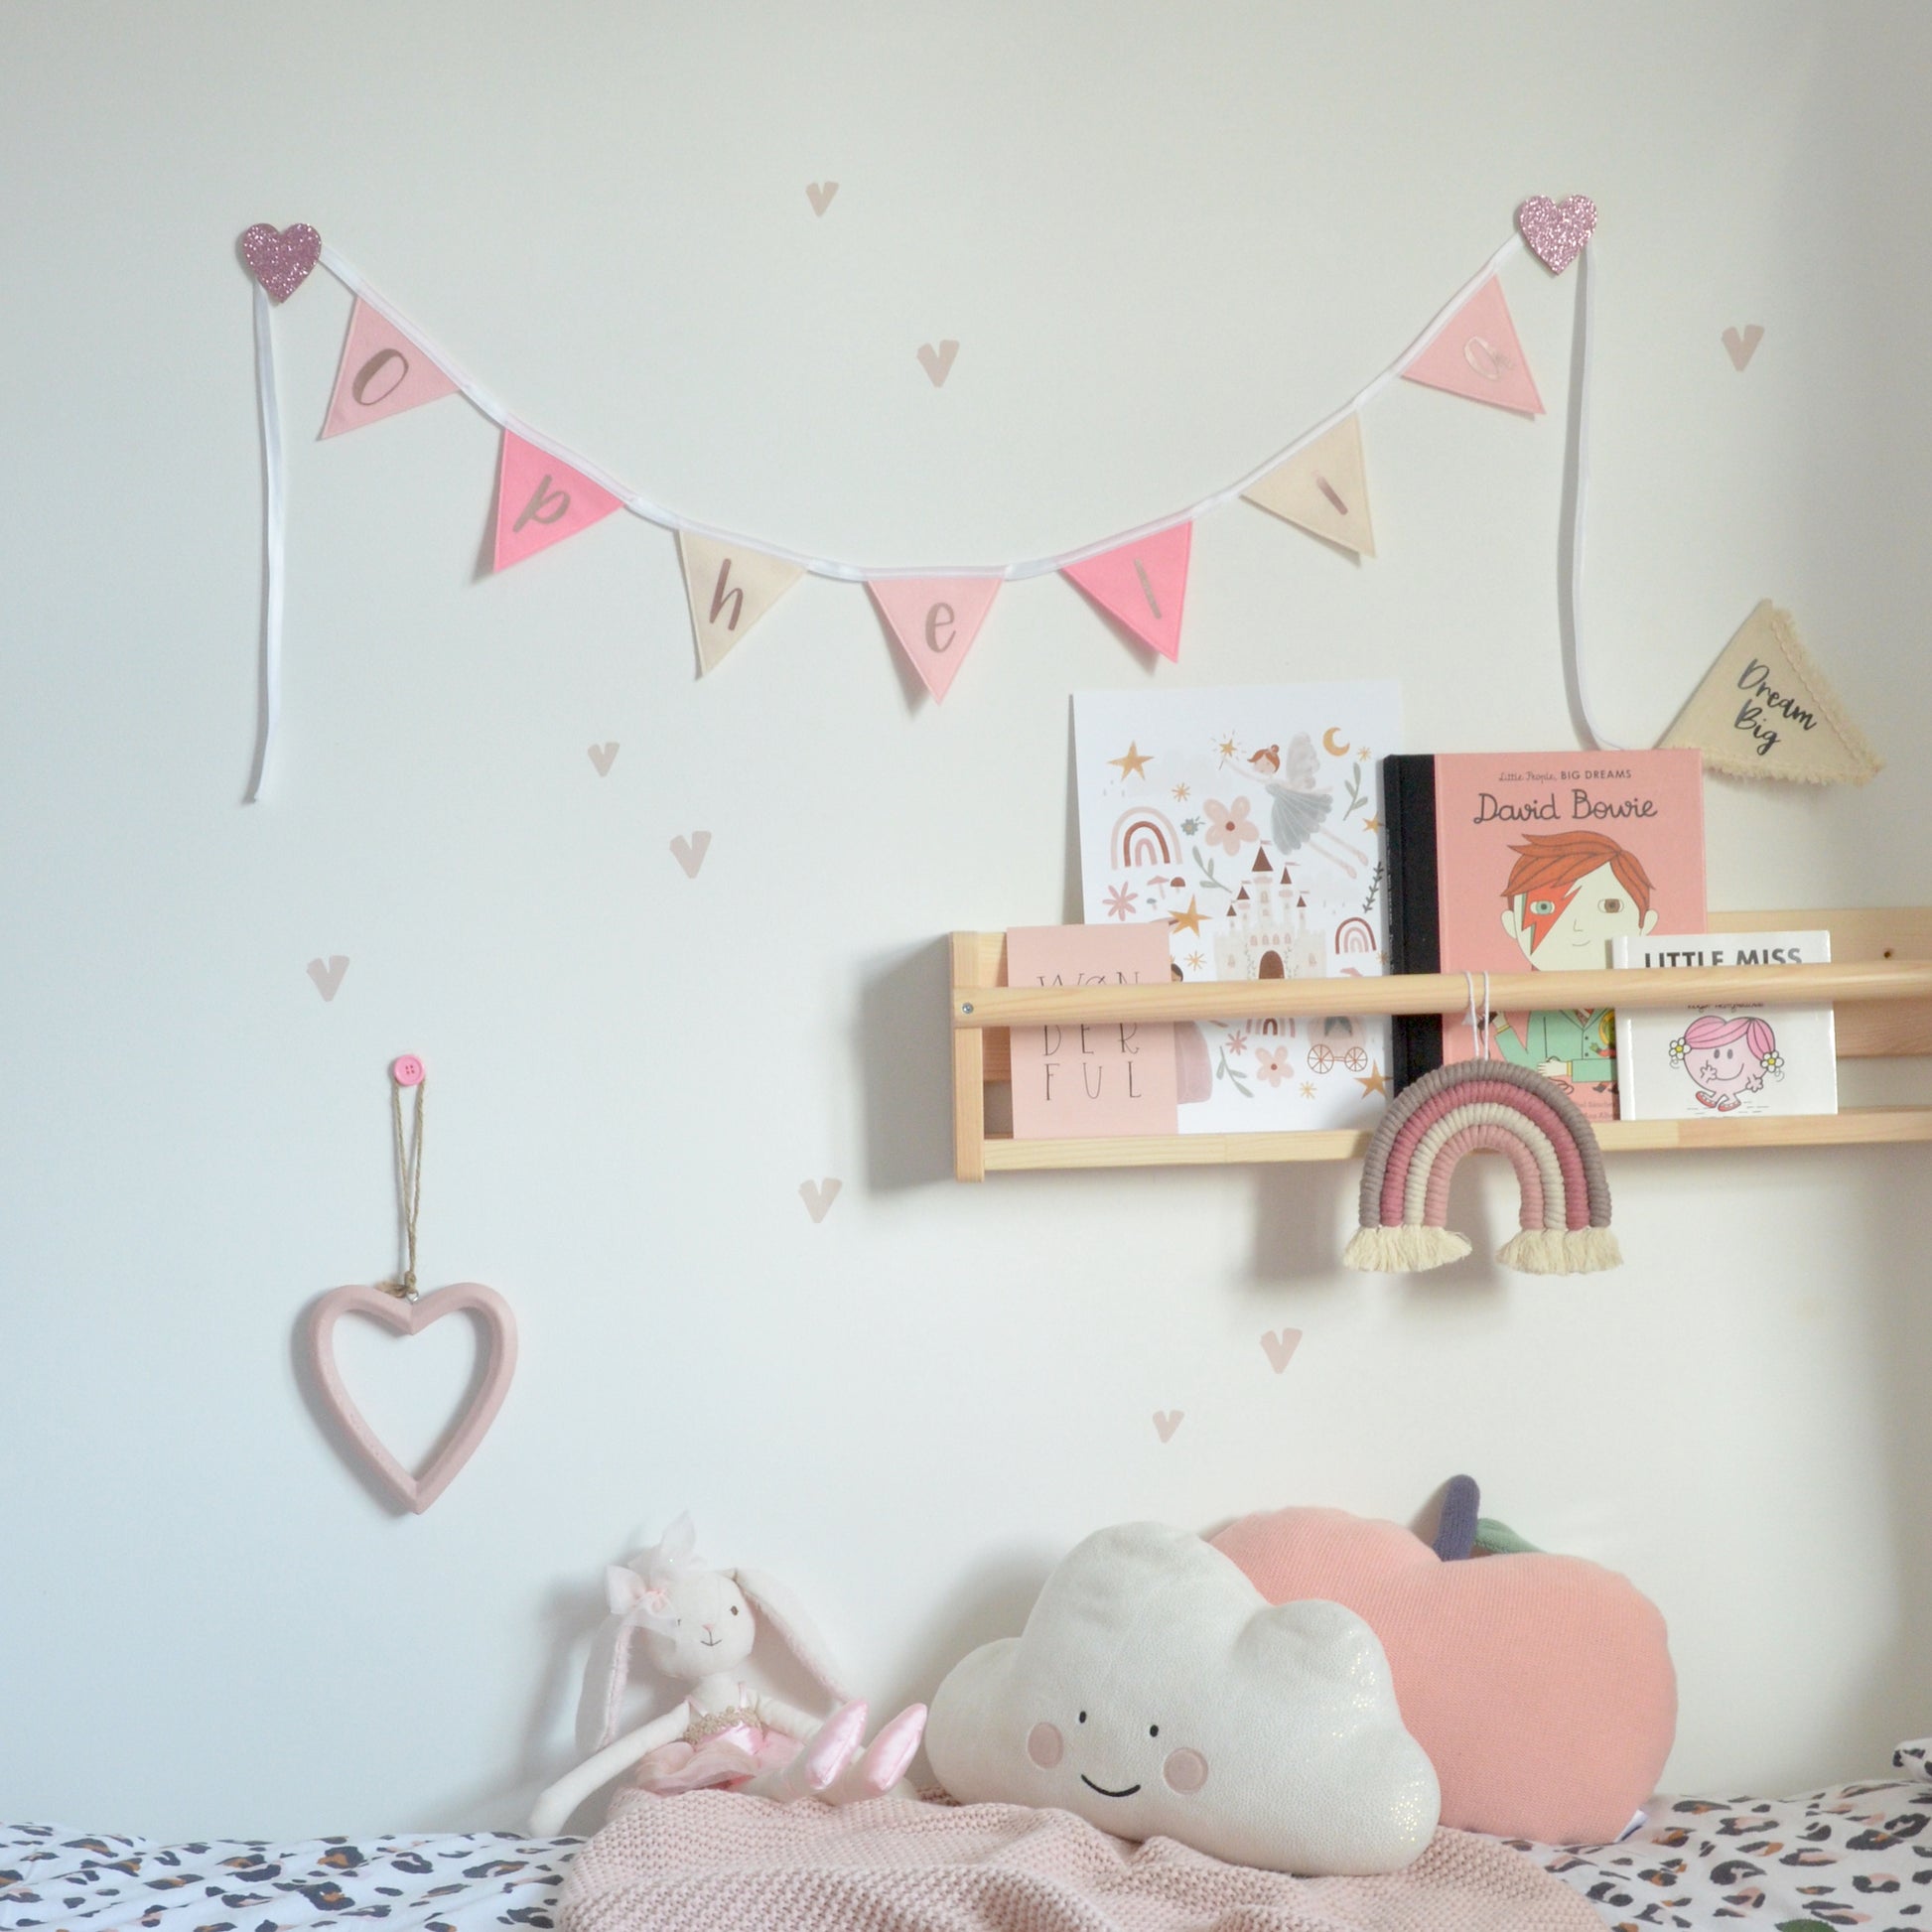 personalised pink decoration ideas for girls bedroom or nursery